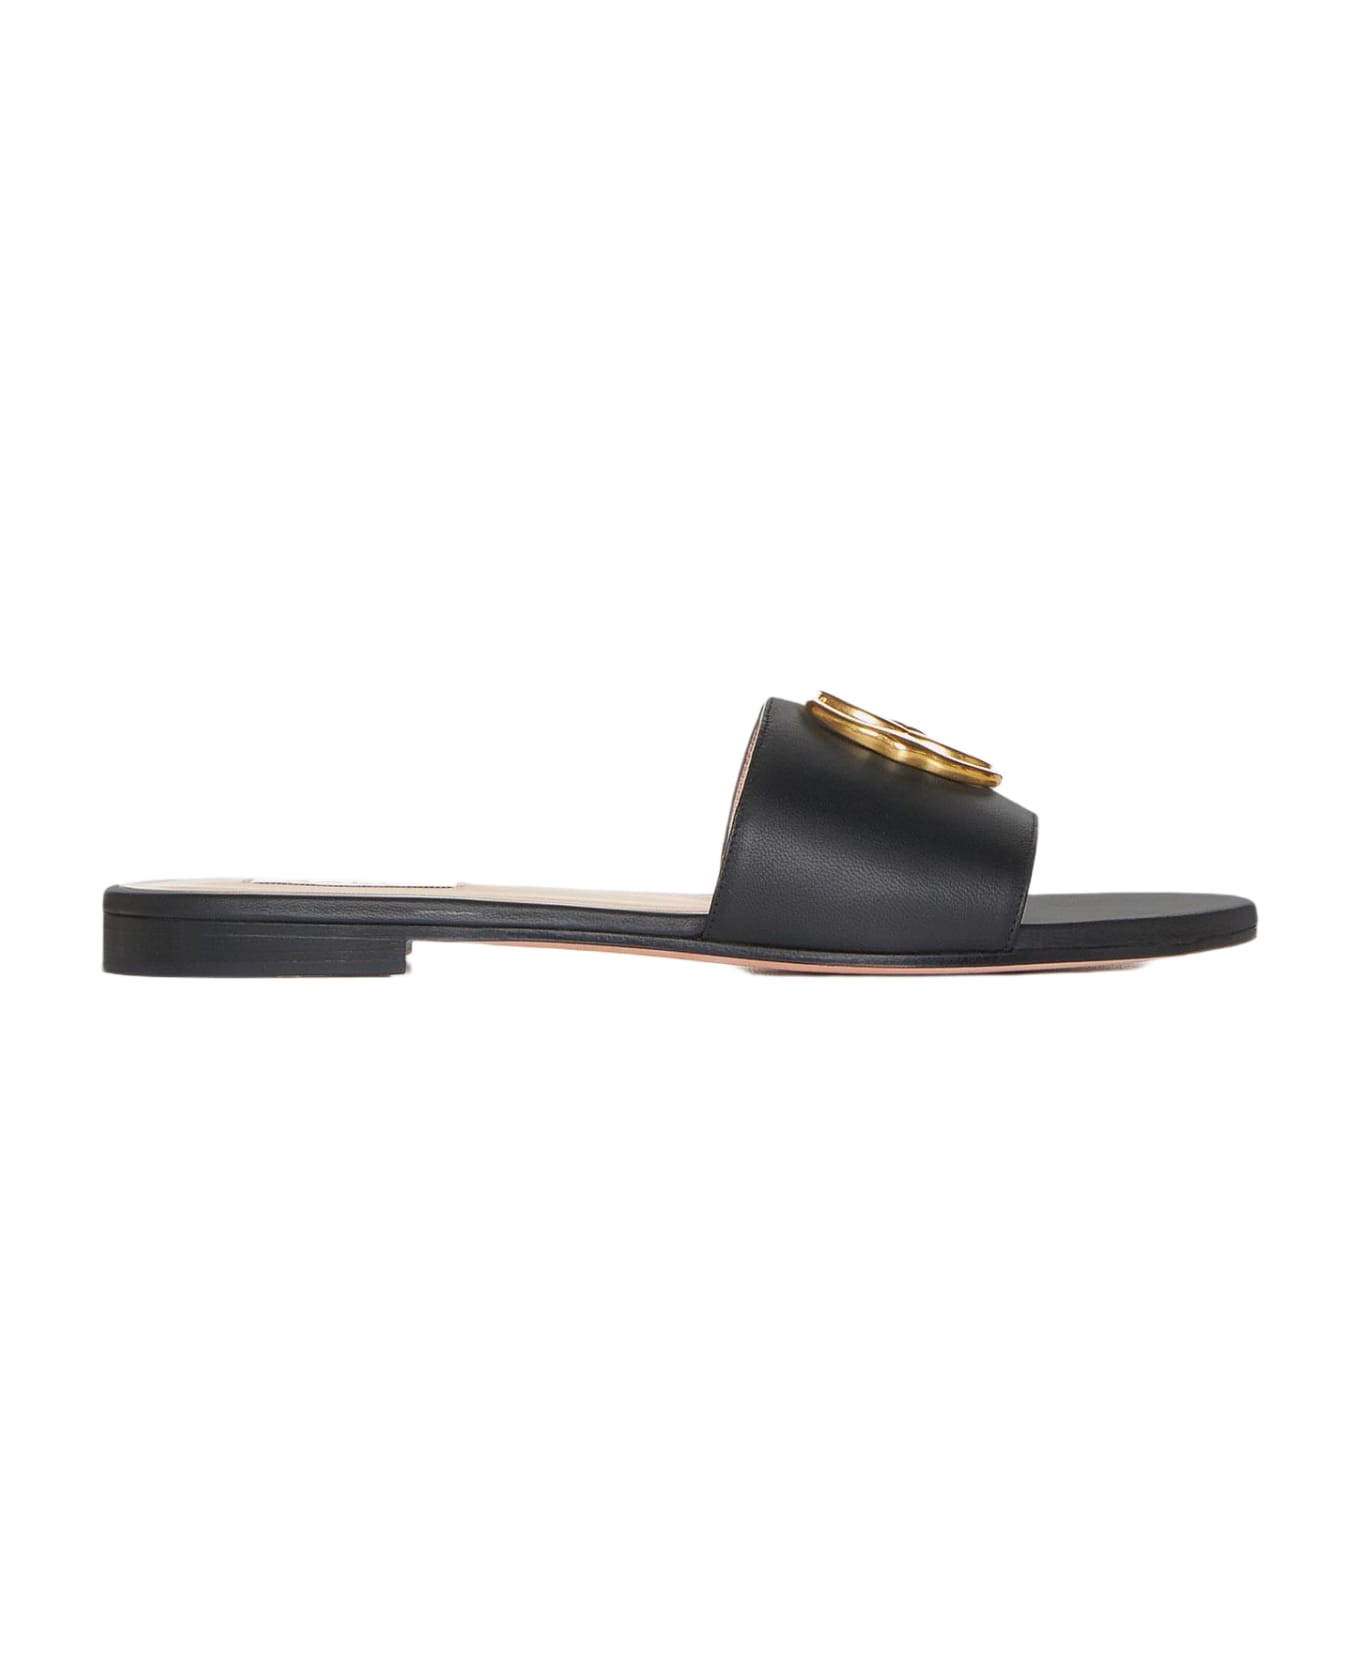 Bally Ghis Leather Flat Sandals - Black